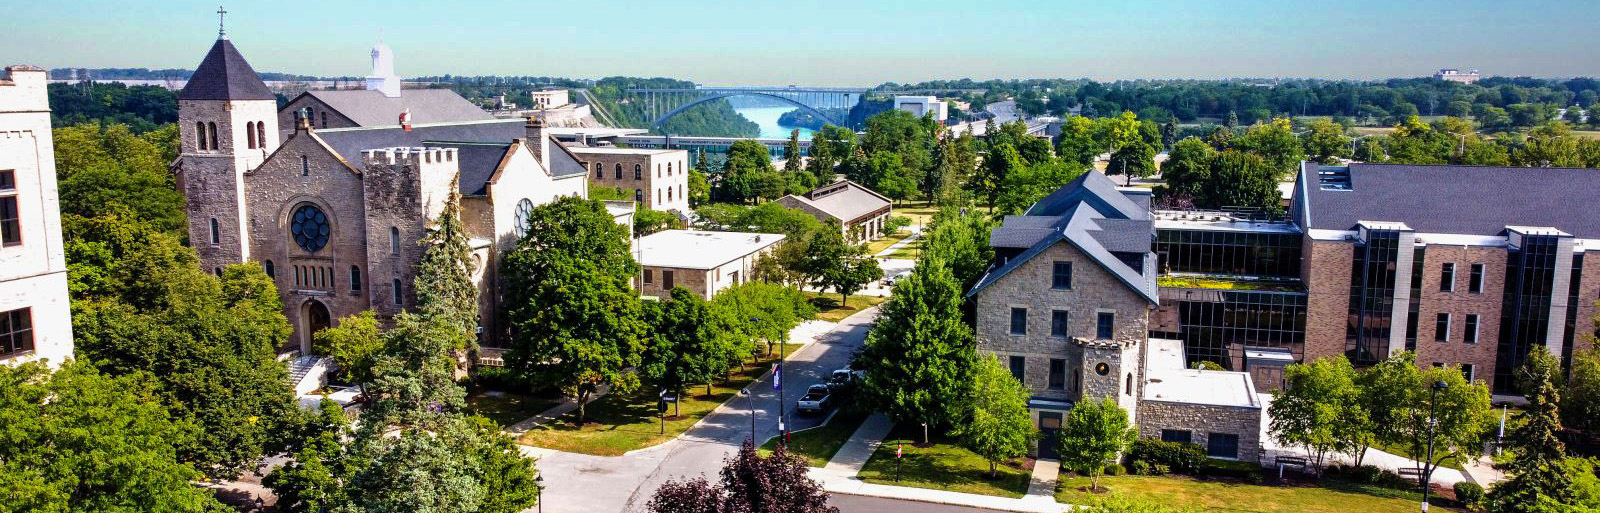 An overhead view of the Niagara University campus in Lewiston, NY, with the Queenston-Lewiston Bridge to Canada in the background.